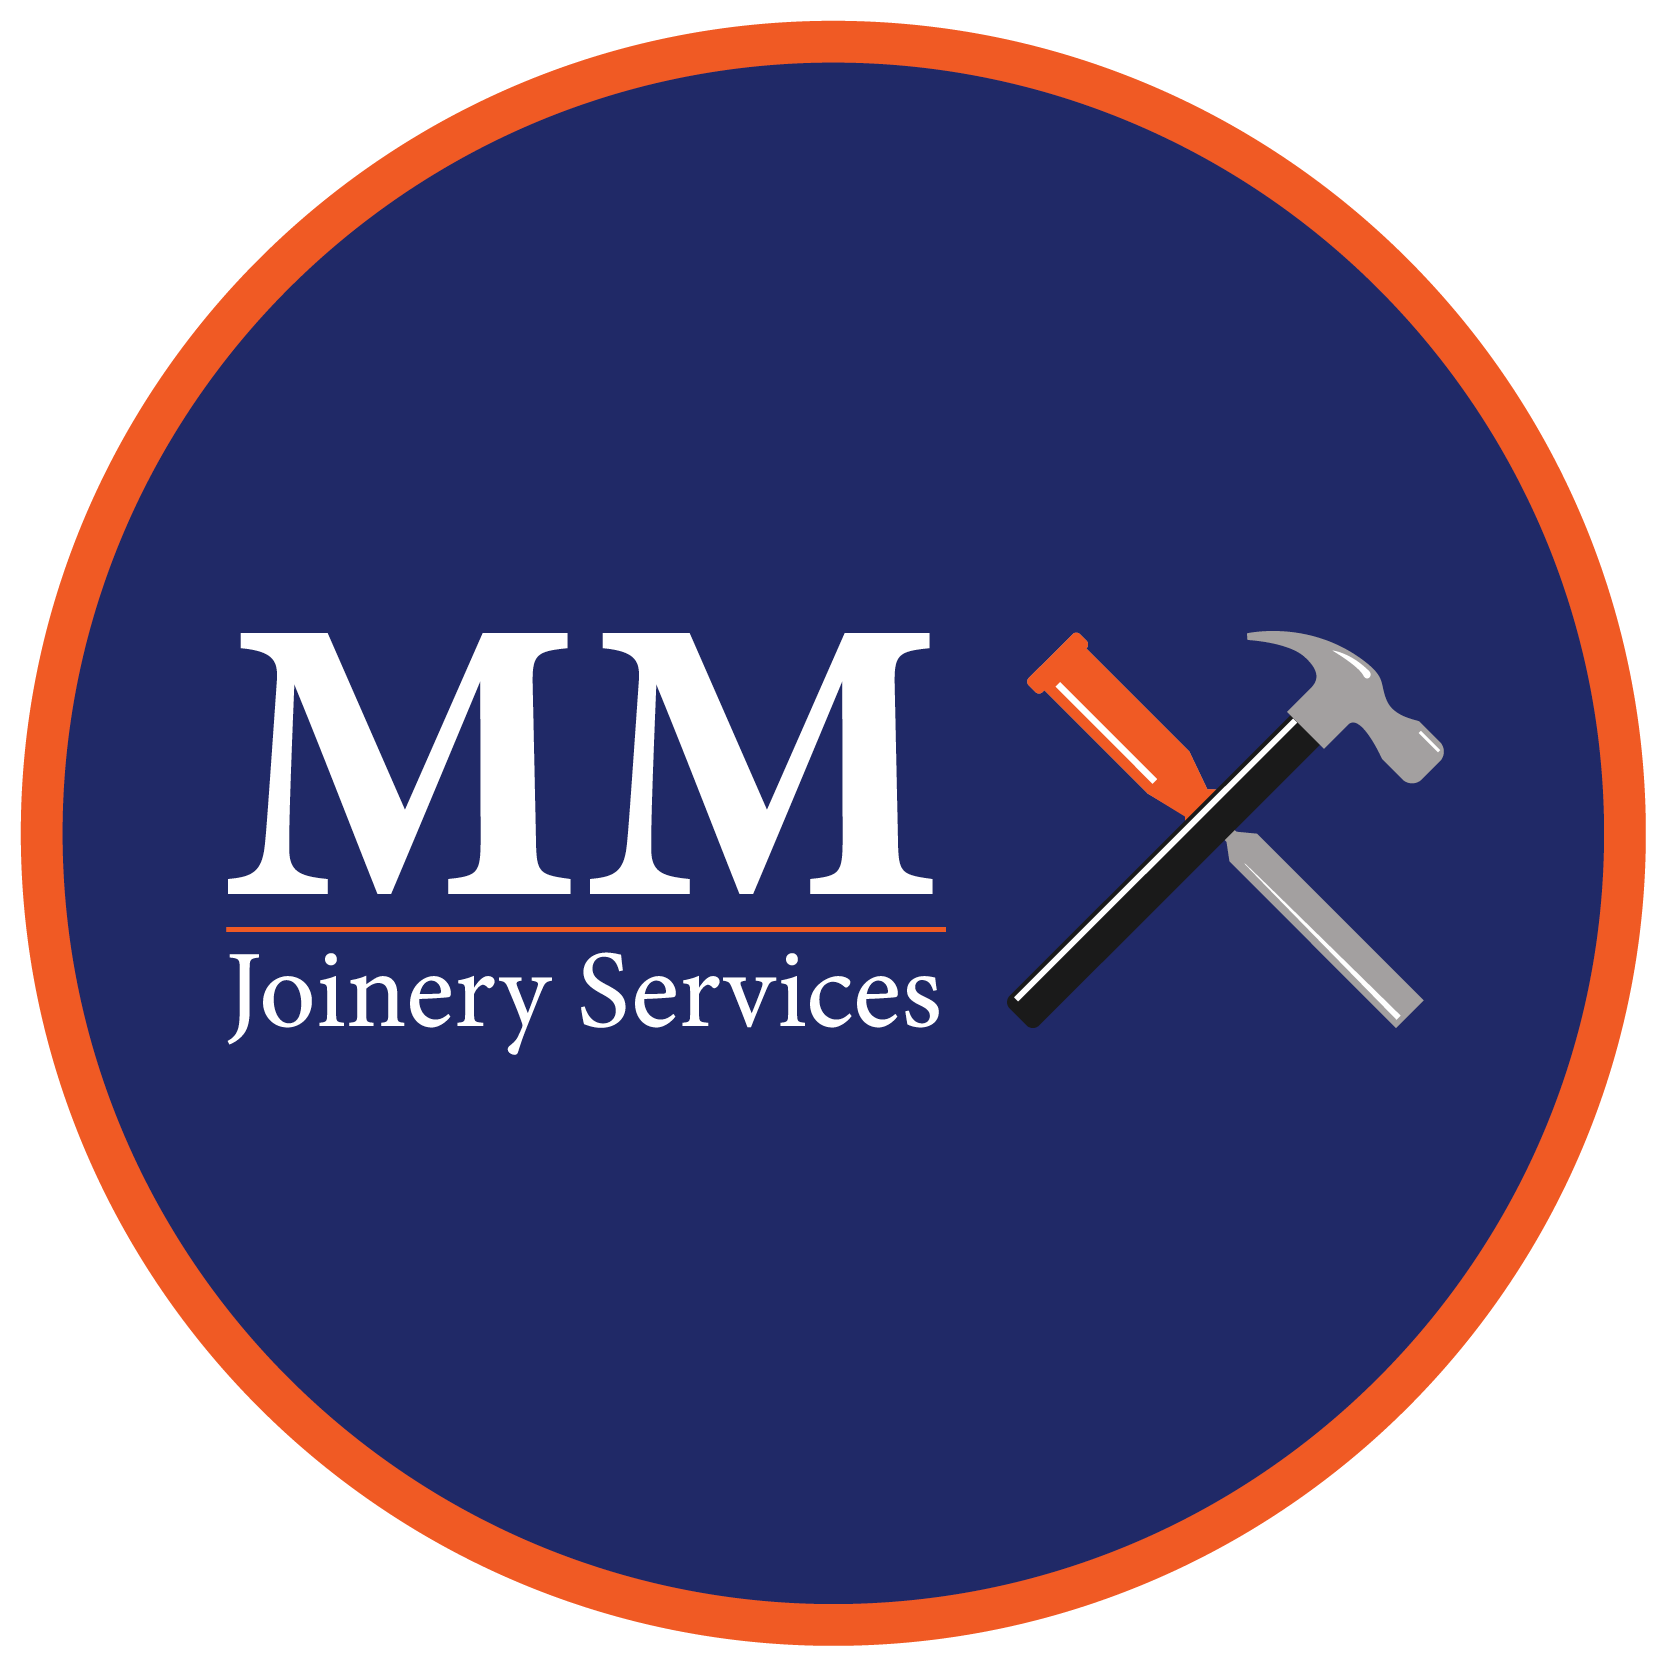 MM Joinery